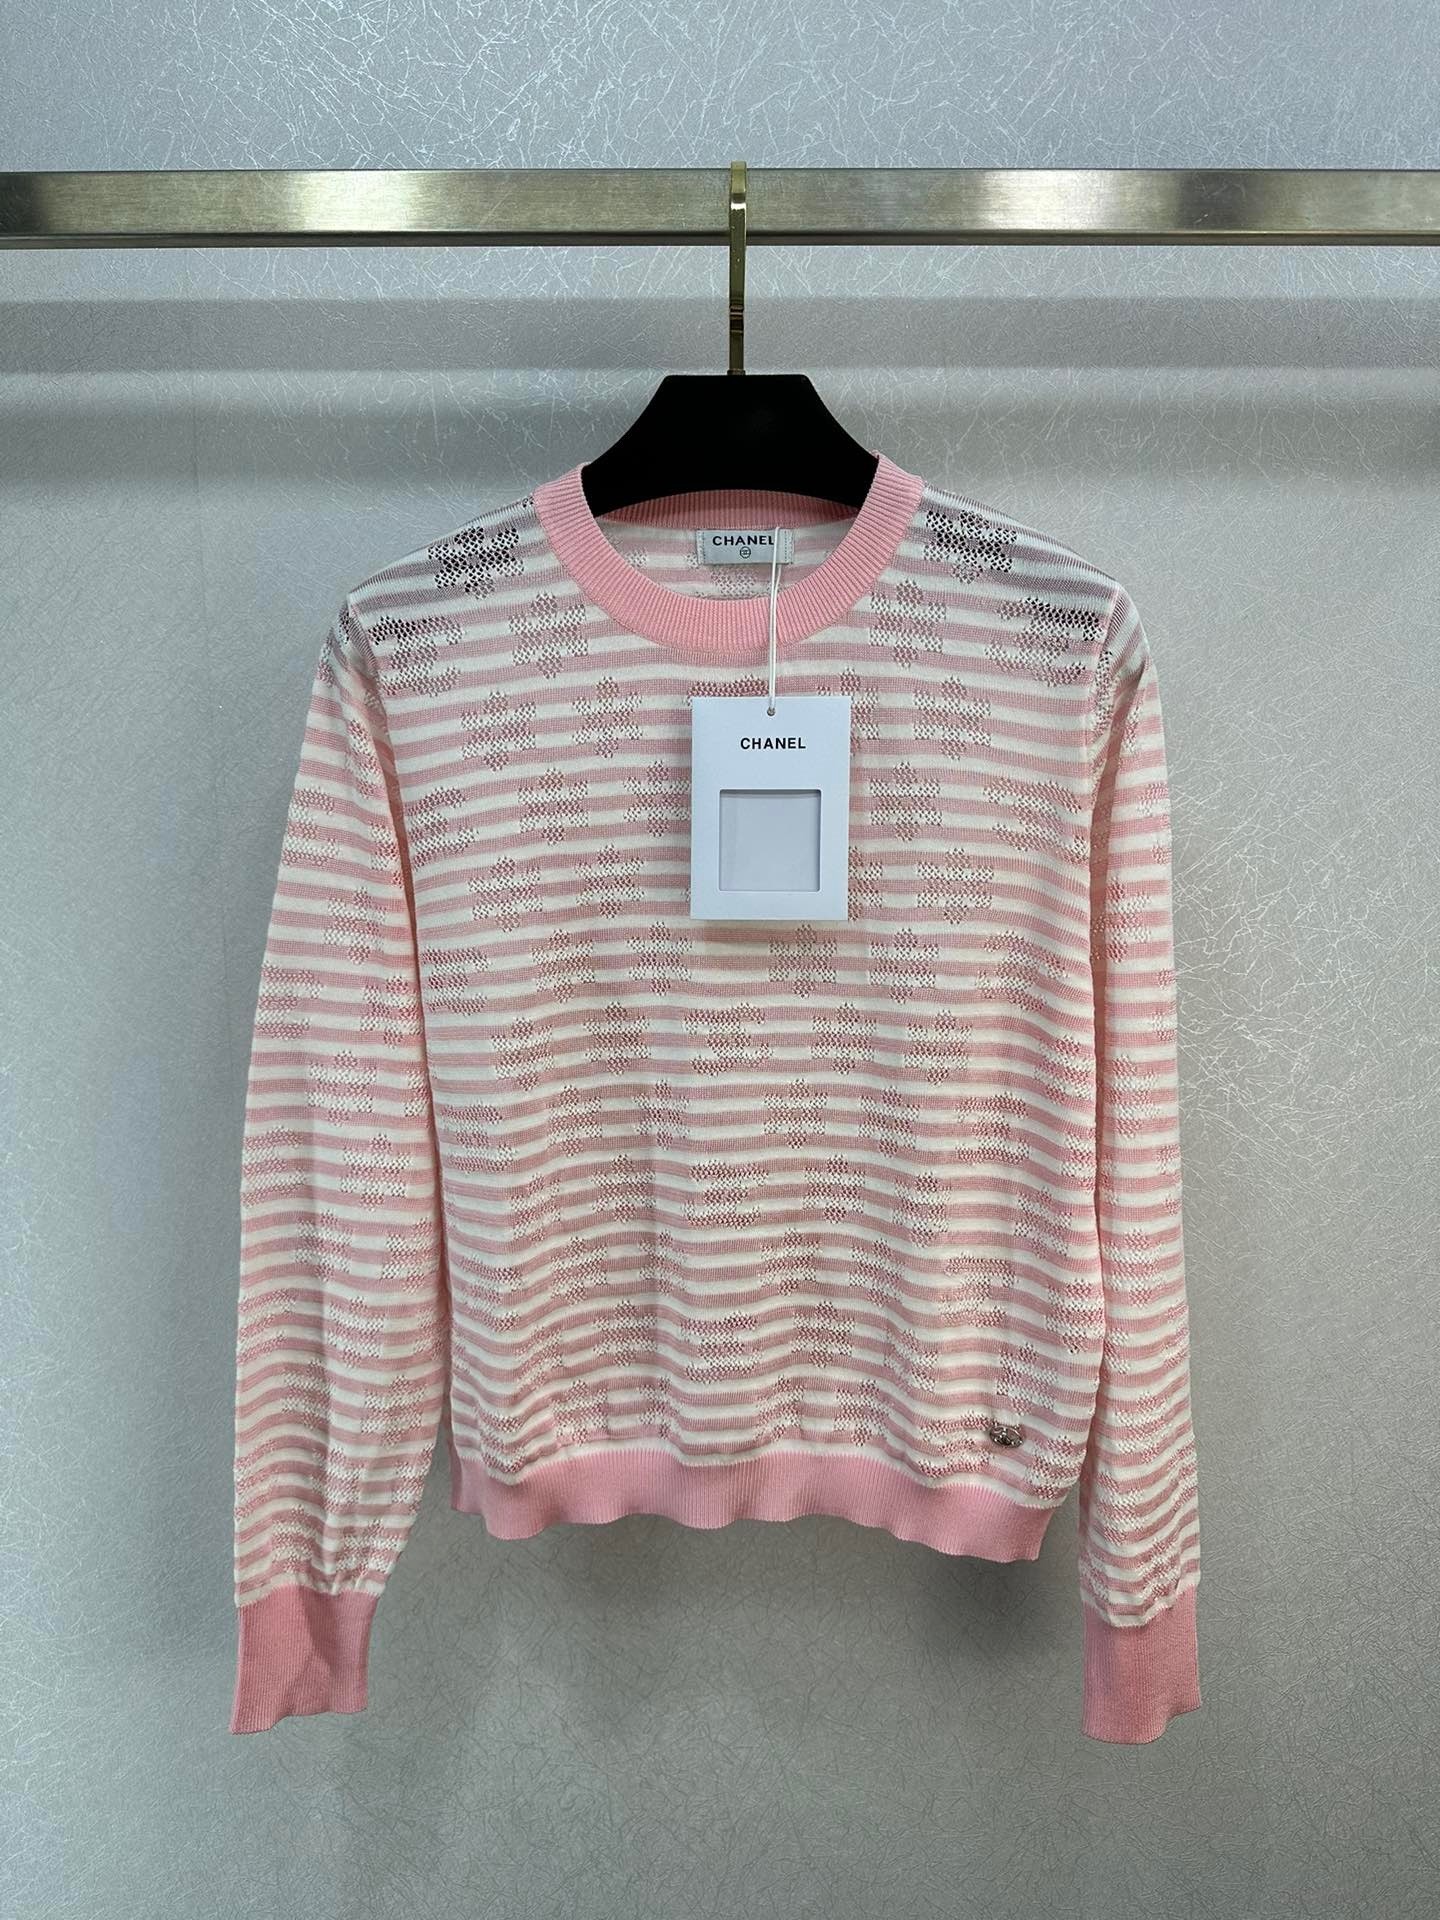 Chanel Clothing Knit Sweater Pink White Openwork Knitting Spring Collection